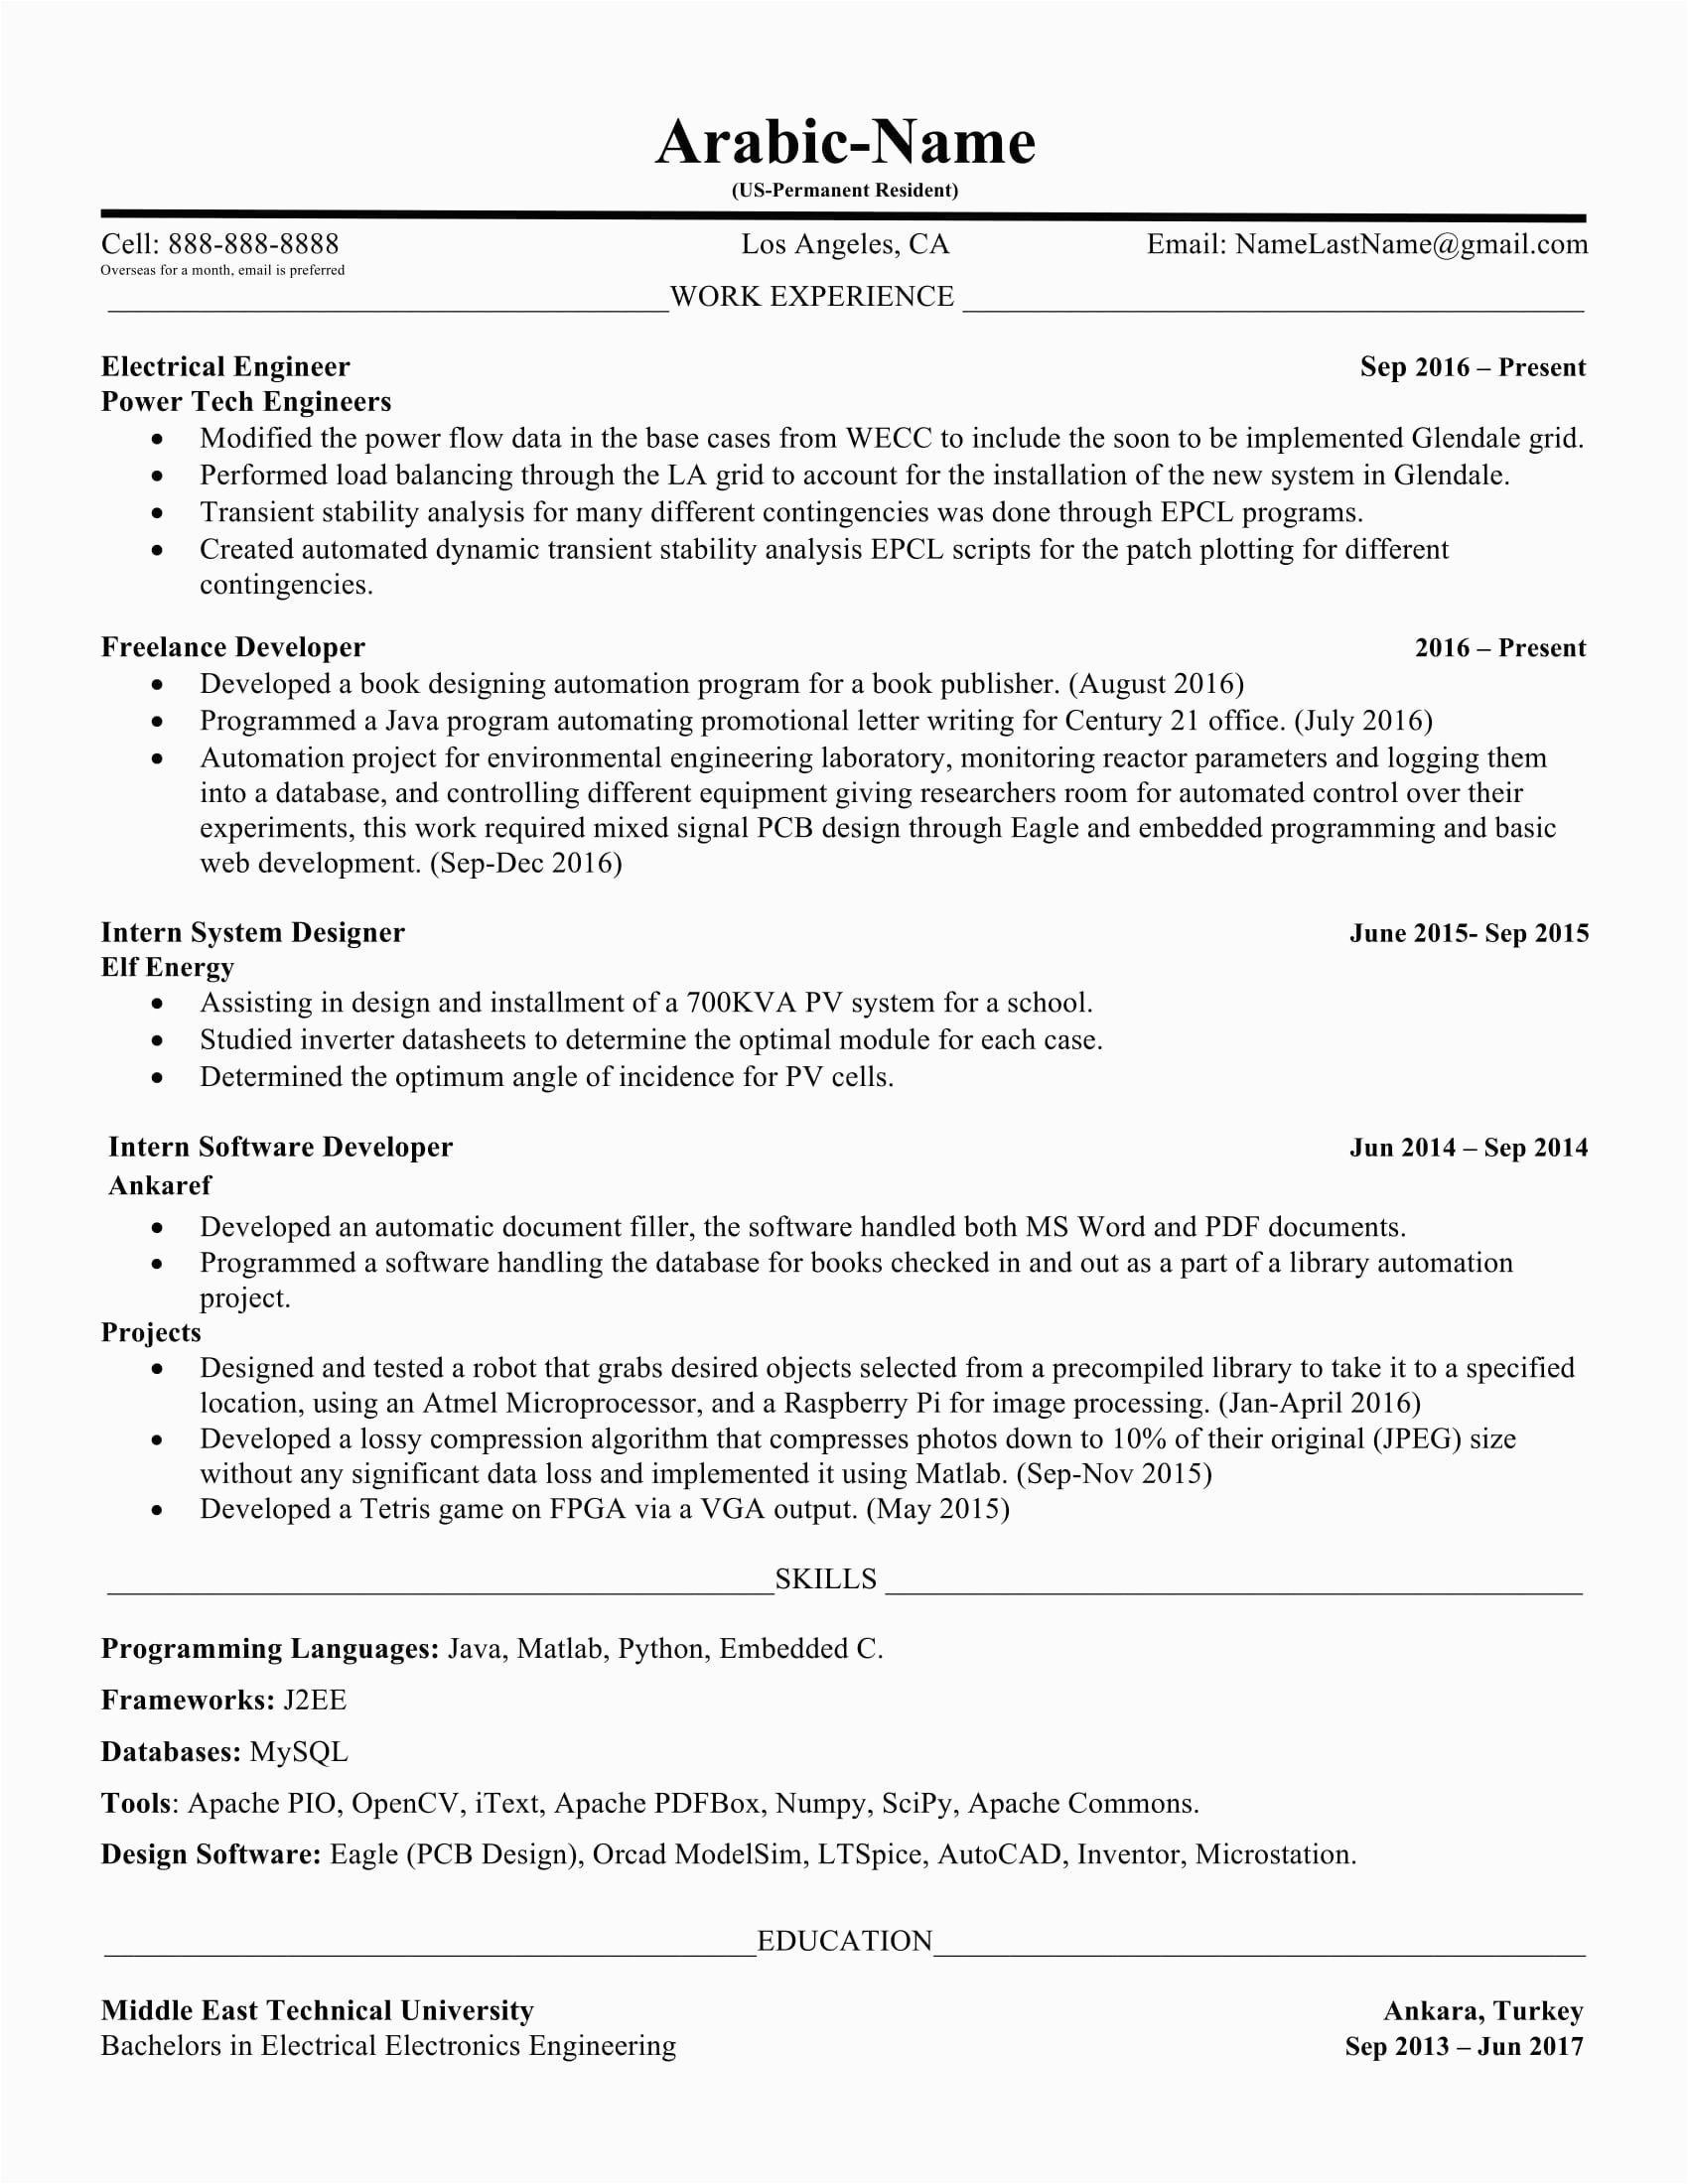 Sample Objectives Of Resume for Engineering Electrical Engineer Resume Objective 7 Electrical Engineering Ideas